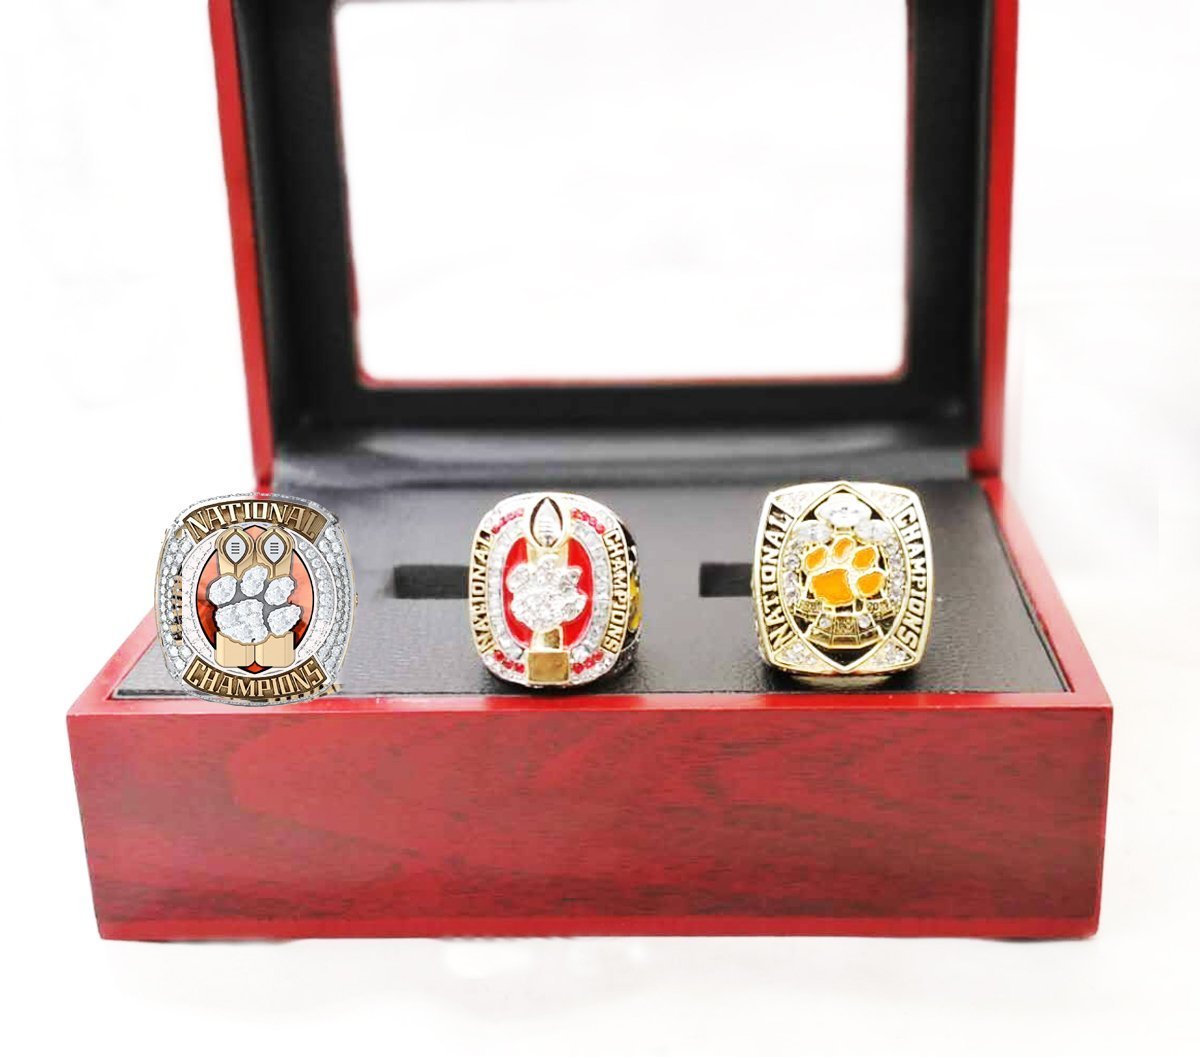 Clemson Tigers College National Championship 3 Ring Set (1981, 2016, 2018) - Rings For Champs, NFL rings, MLB rings, NBA rings, NHL rings, NCAA rings, Super bowl ring, Superbowl ring, Super bowl rings, Superbowl rings, Dallas Cowboys